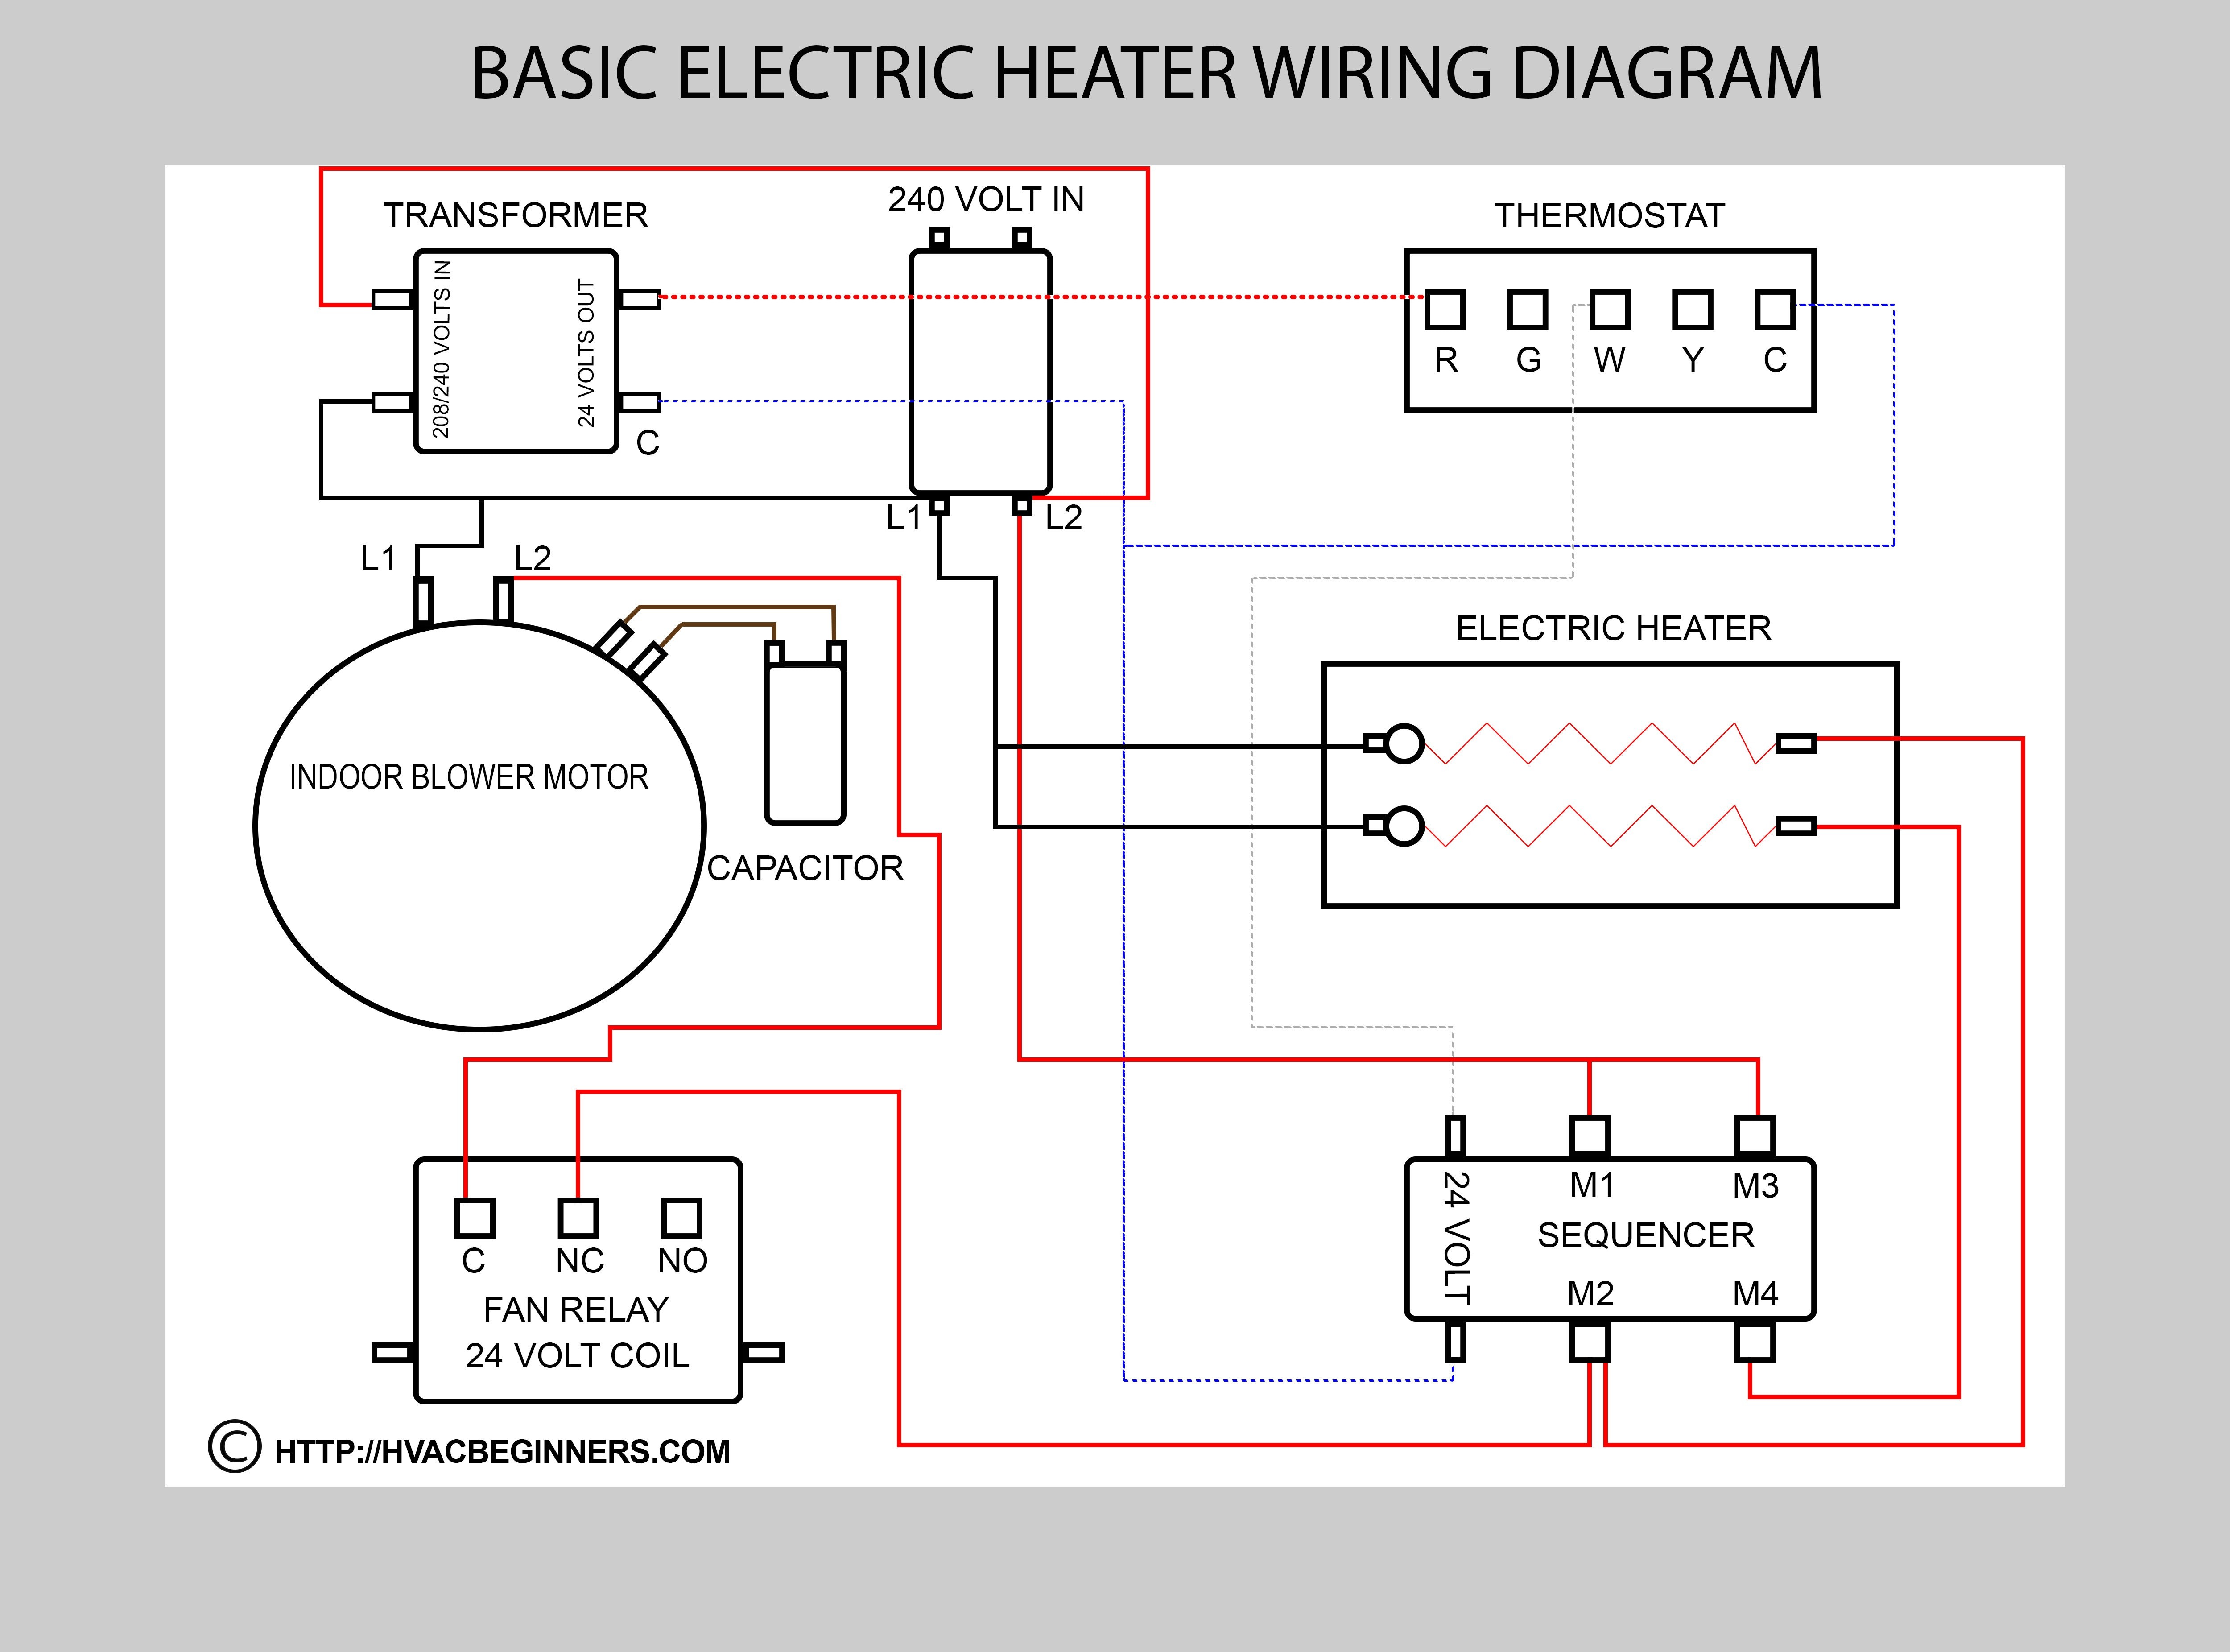 central air conditioner wiring diagram Collection Split system air conditioner wiring diagram hvac wire central